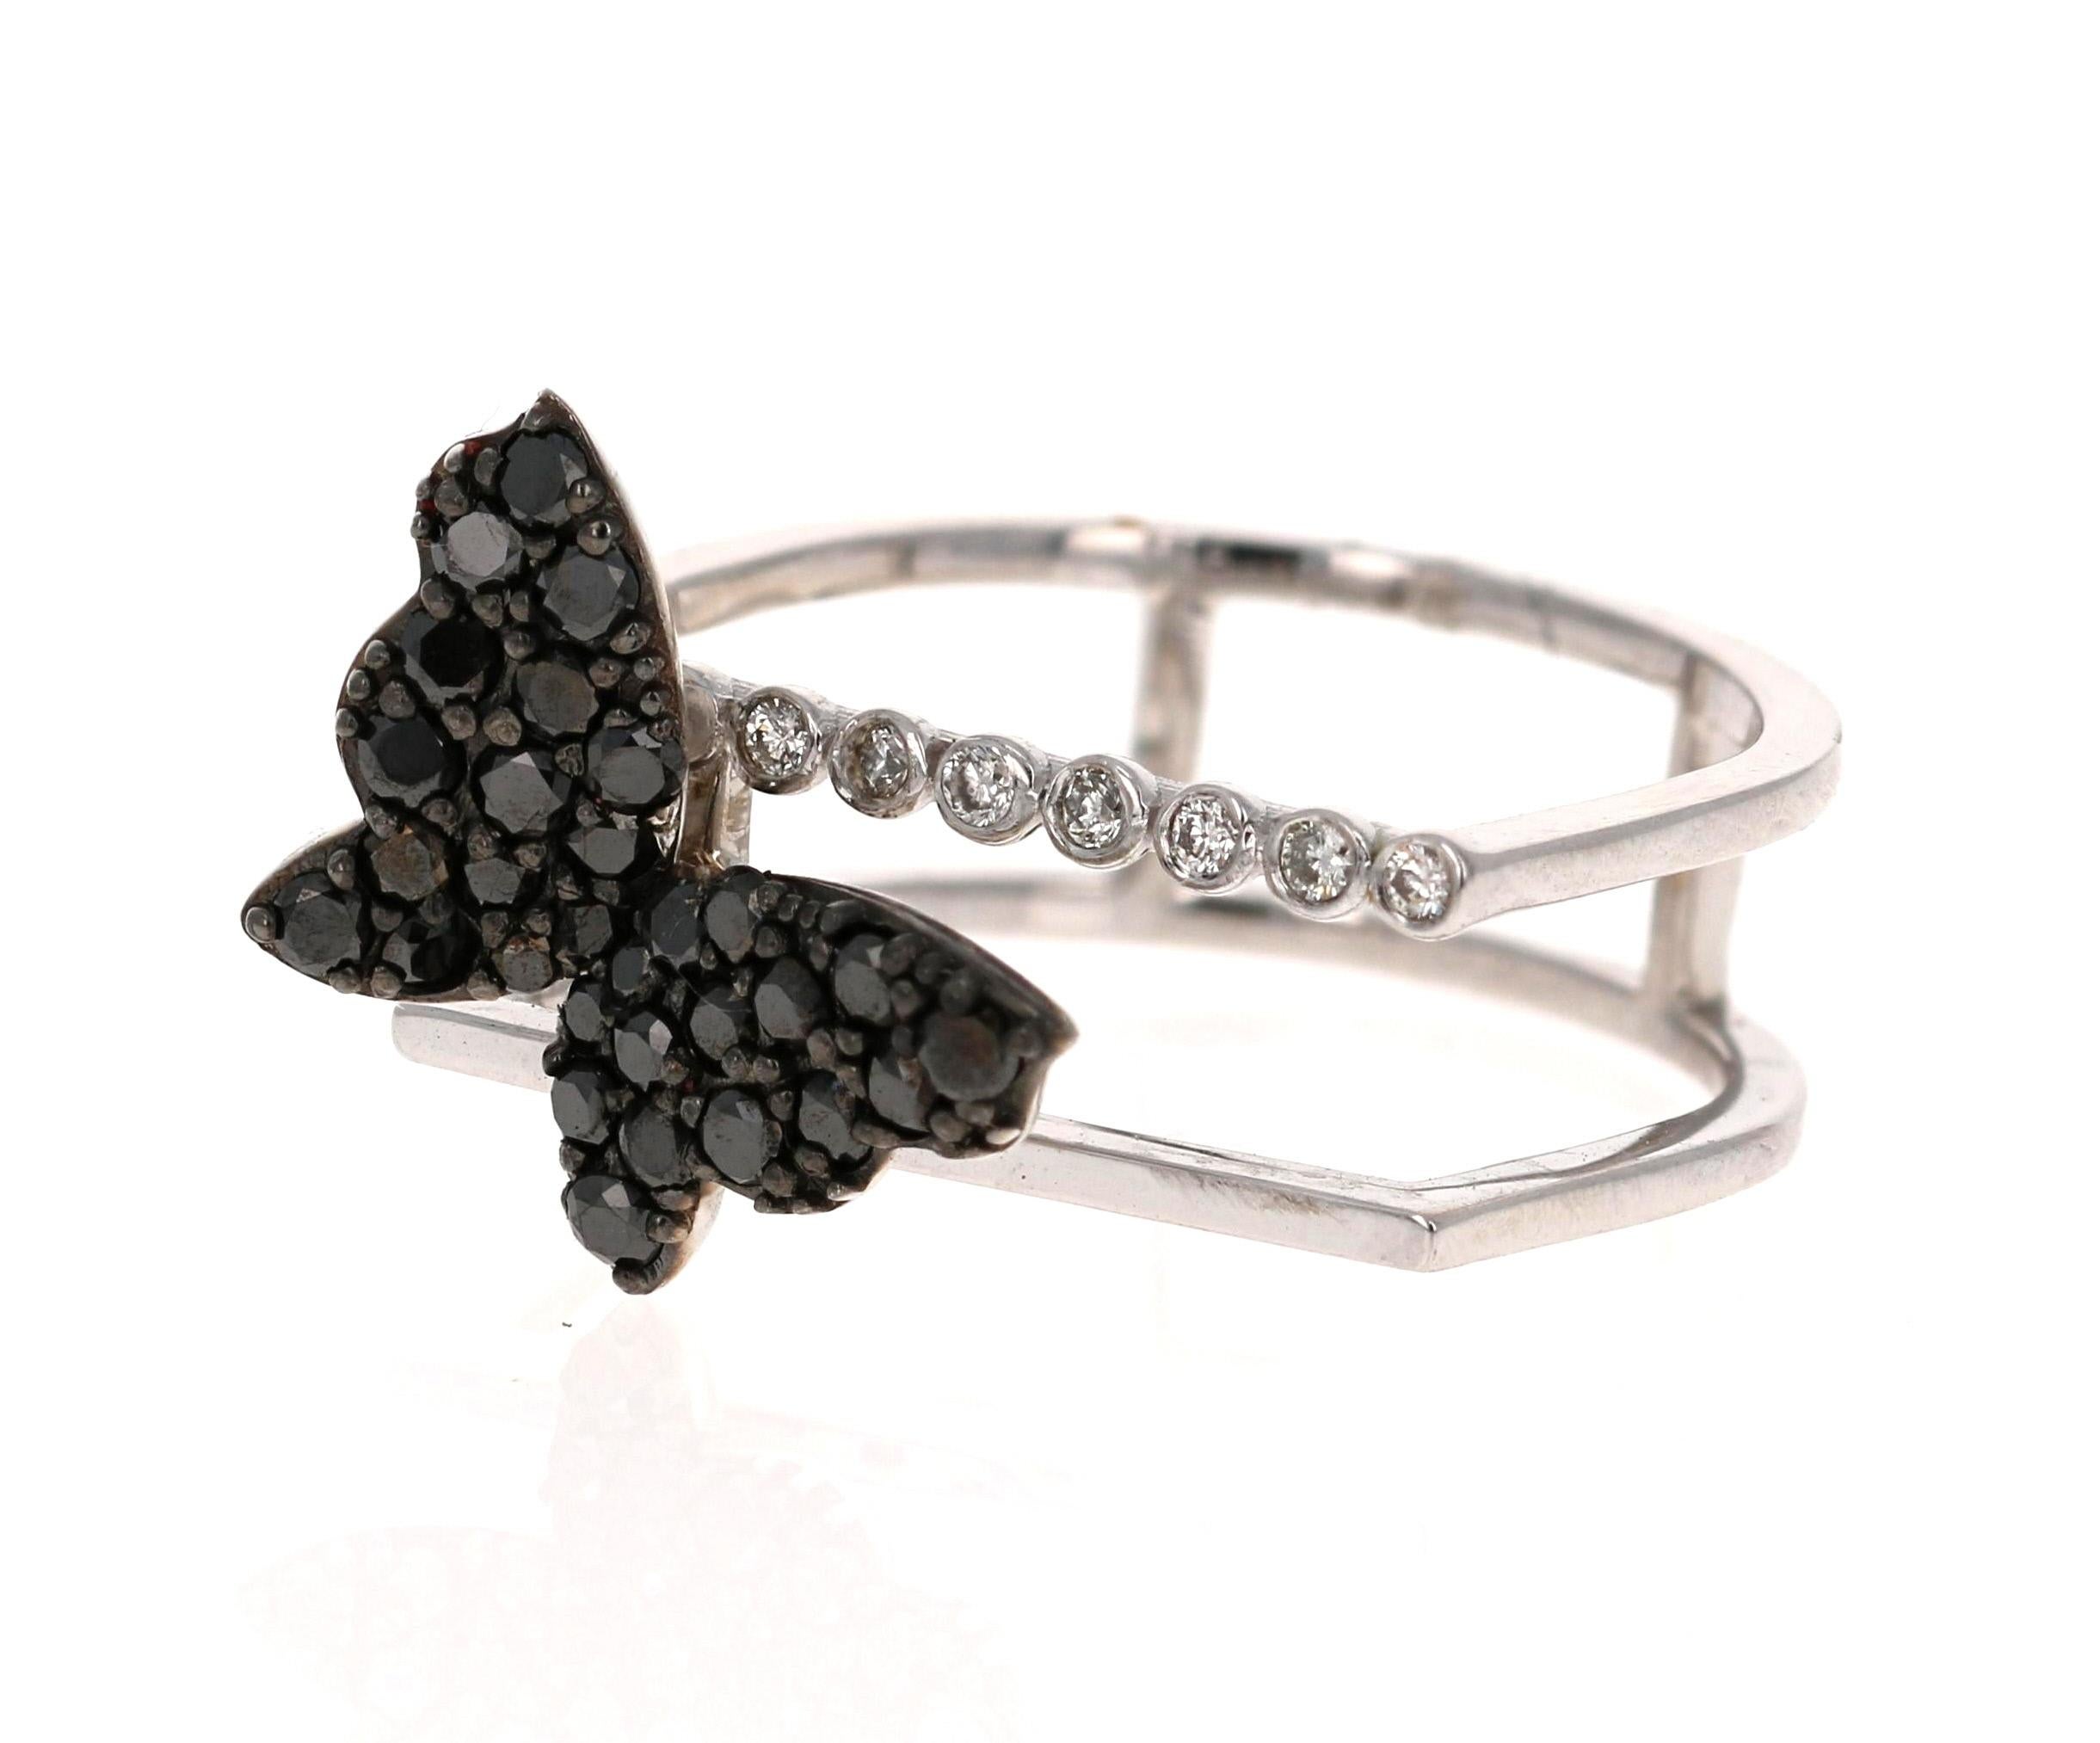 This ring has 30 Round Cut Black Diamonds that weigh 0.65 Carats and 7 Round Cut Diamonds weighing 0.07 Carats (Clarity: SI2, Color:F).  The total carat weight of the ring is 0.72 Carats. 

It is beautifully set in 14 Karat White Gold and is